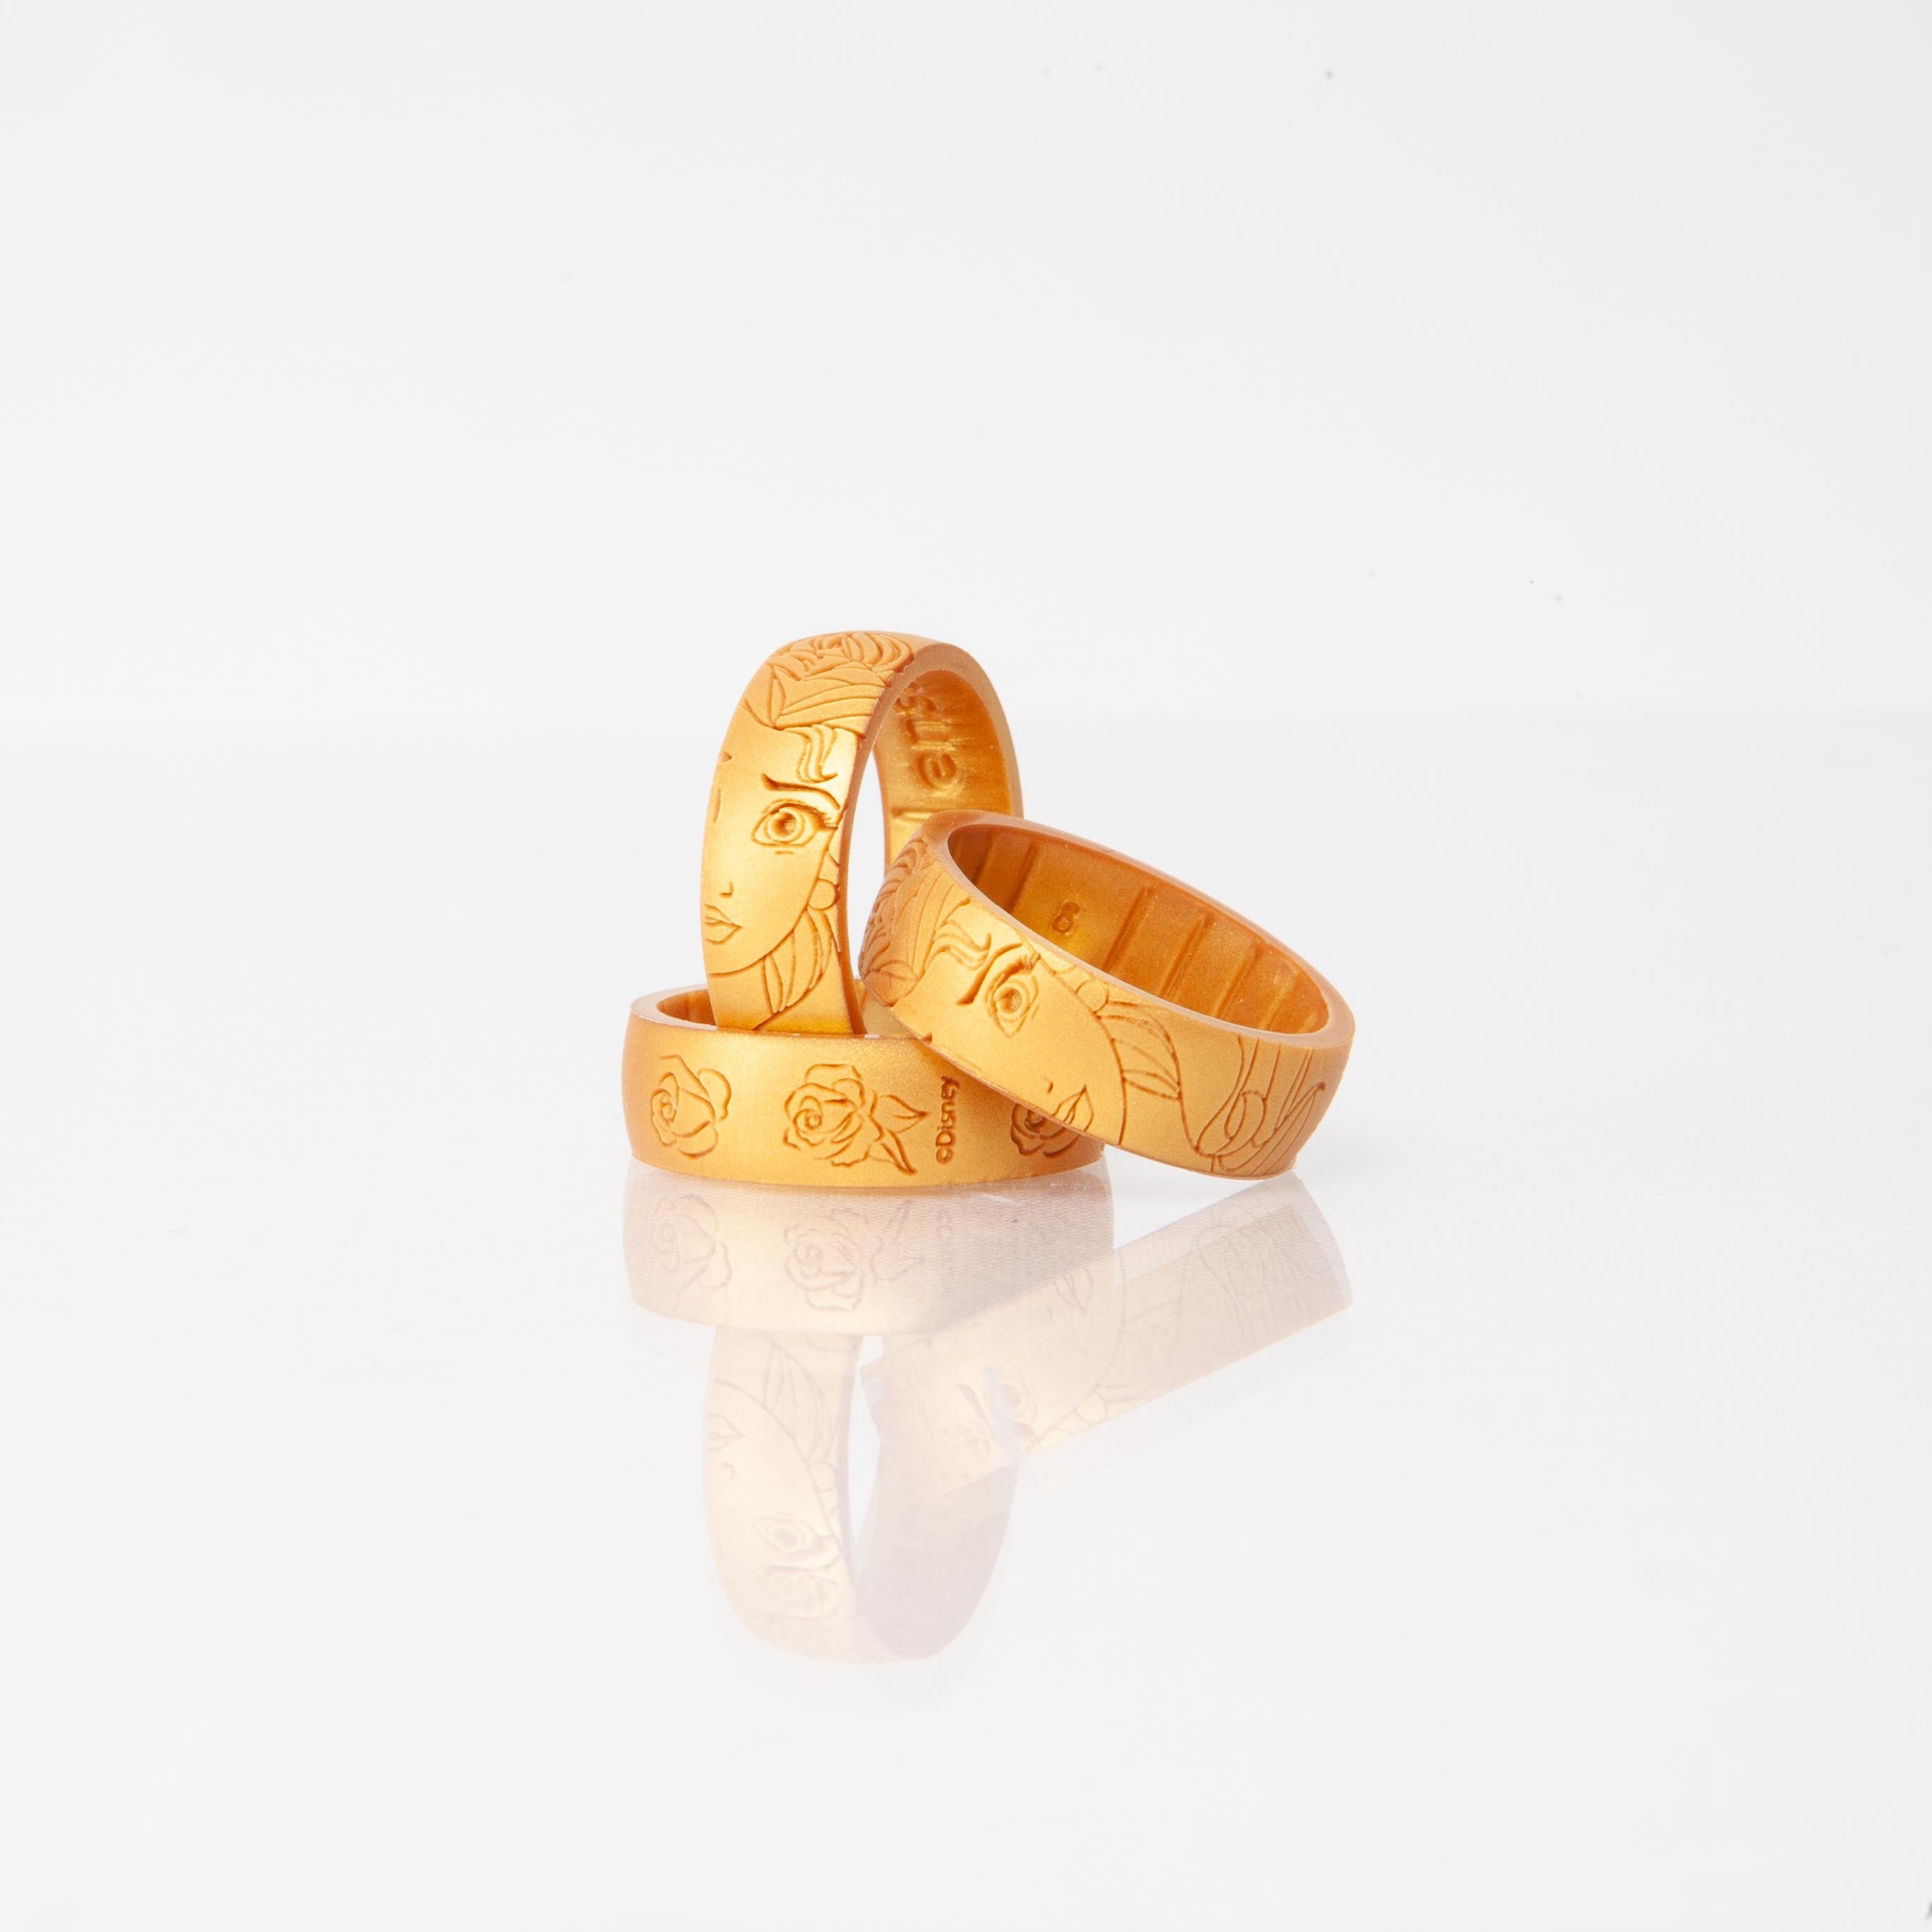 Enso Rings presents its top collections, now packaged in a 2-Ring